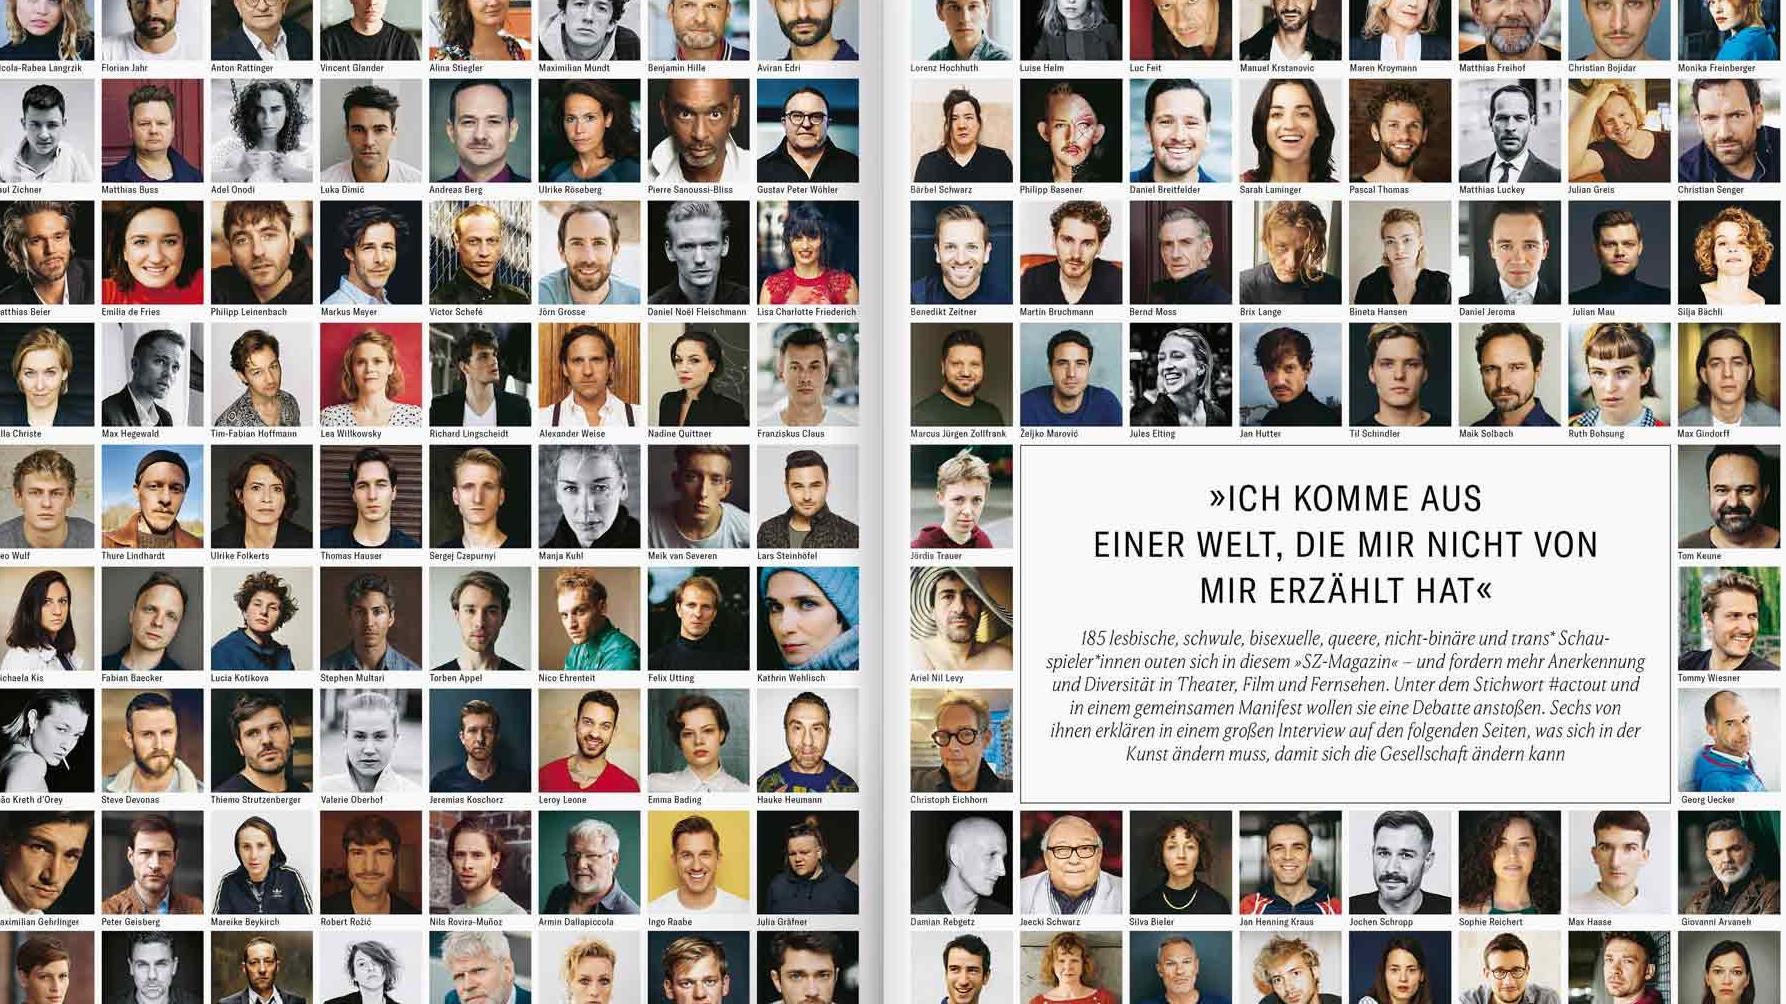 On the front page of Süddeutsche Zeitung Magazin, one of Germany's largest publications, 185 actors have come out as LGBTQ. 